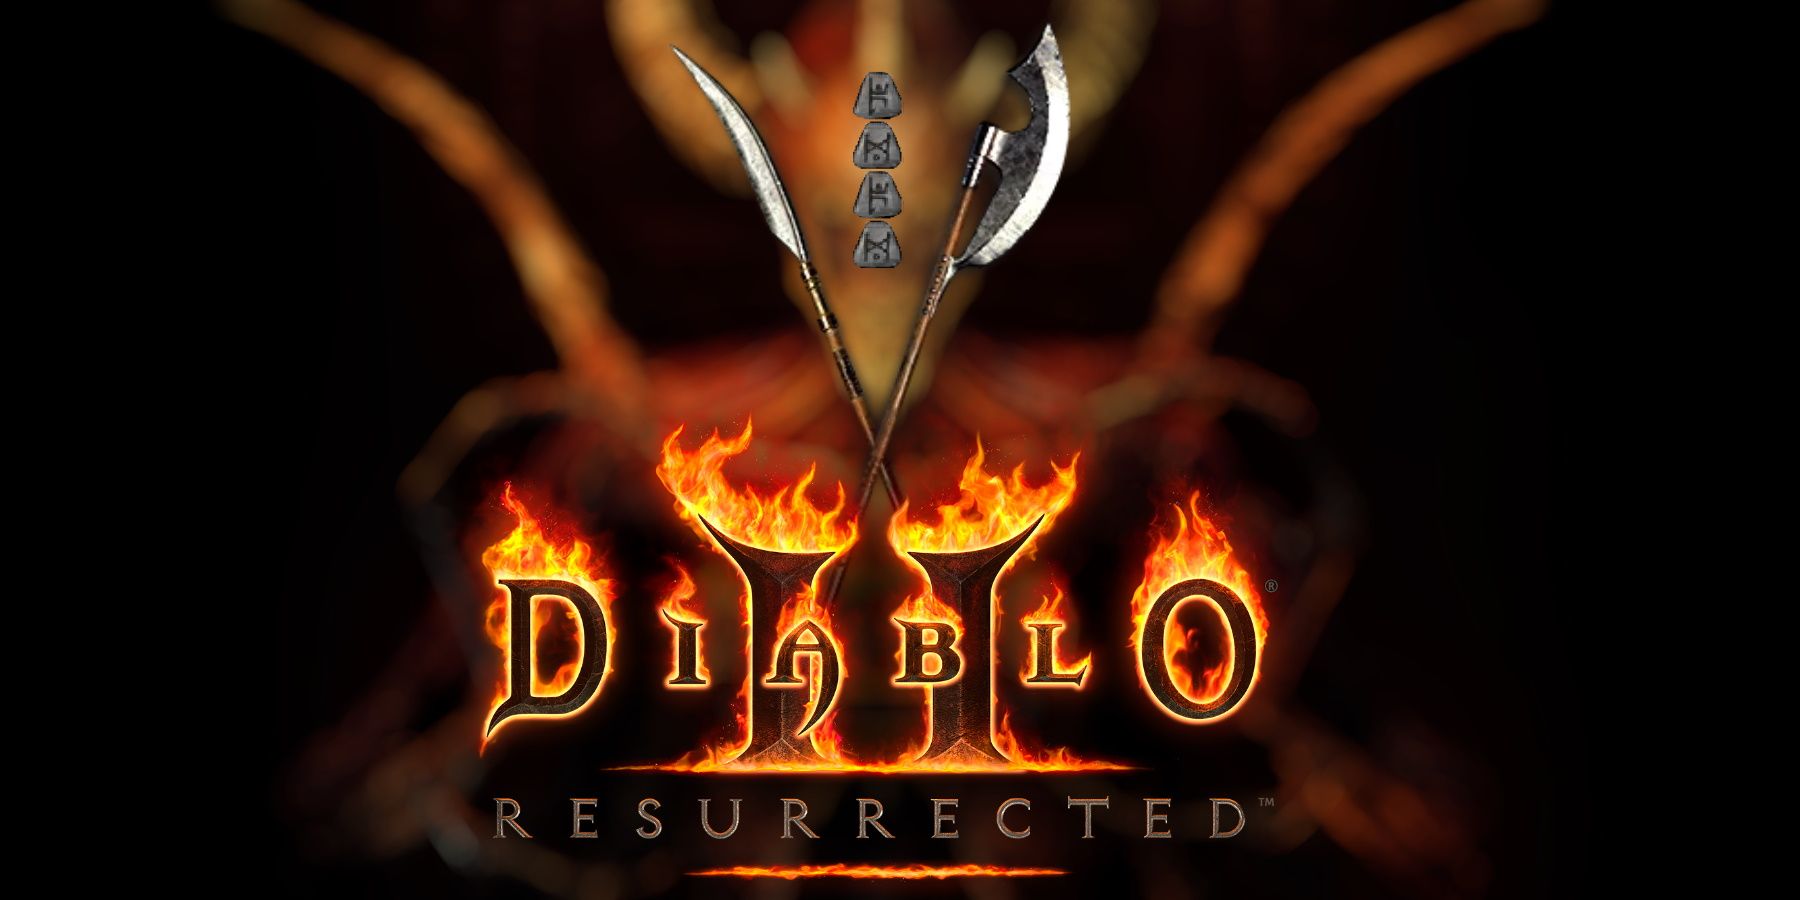 Diablo 2 Resurrected polearms and runes over promotional art and official logo